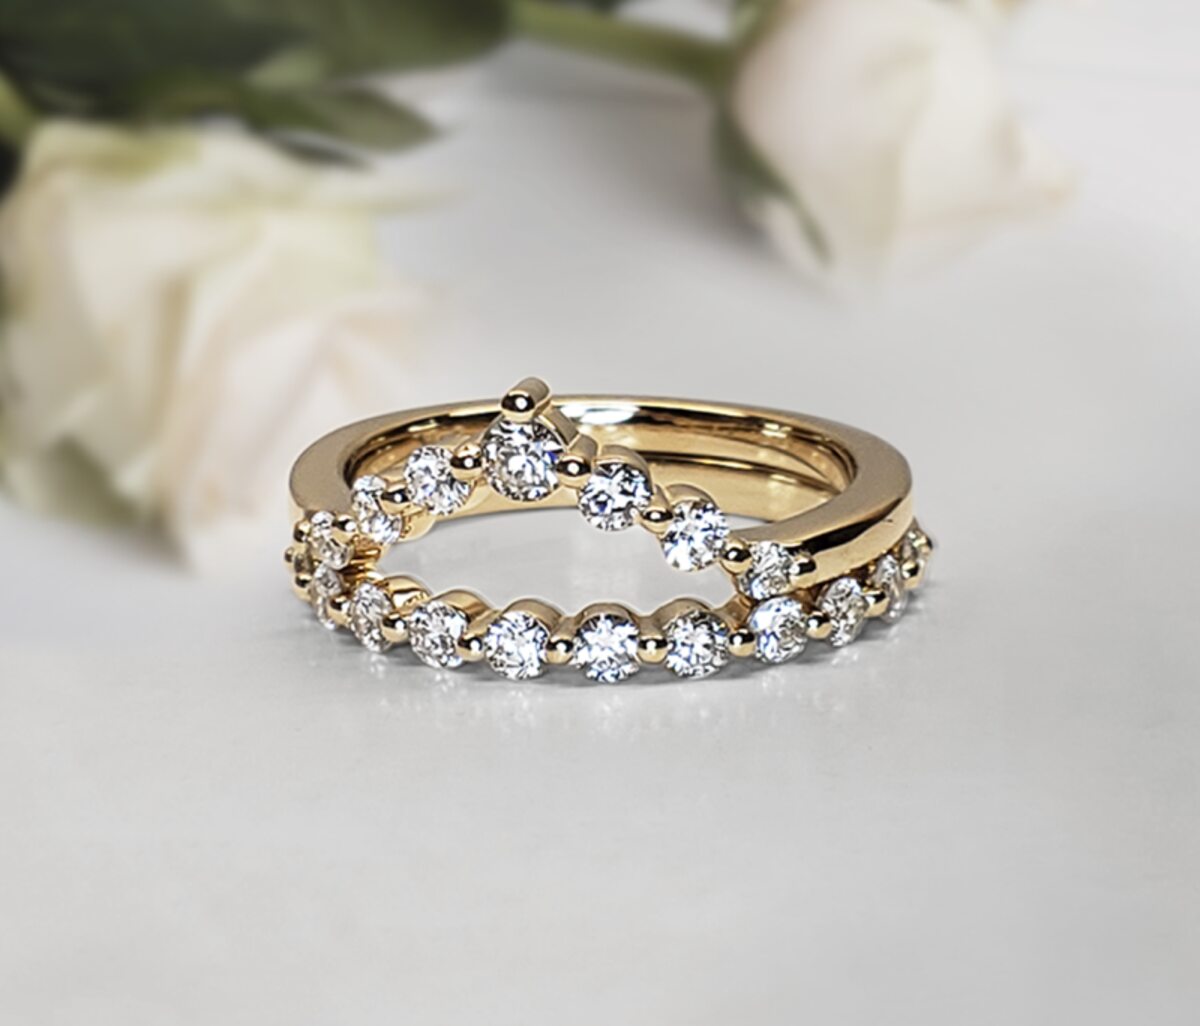 Canadian Daimond Engagement Rings